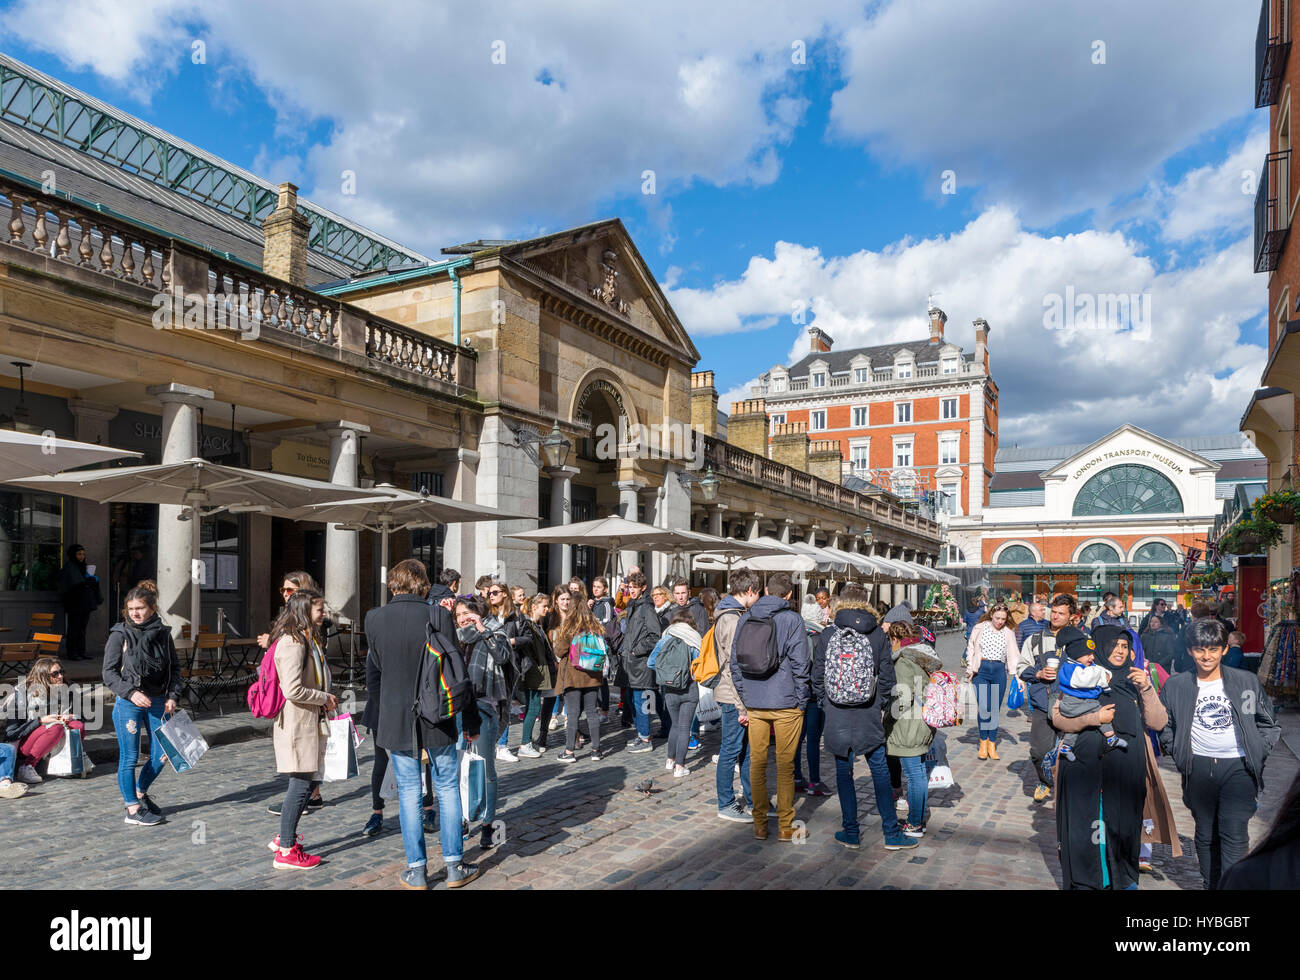 Covent Garden, London. Crowds of tourists outside Covent Garden Market, West End, London, England, UK Stock Photo